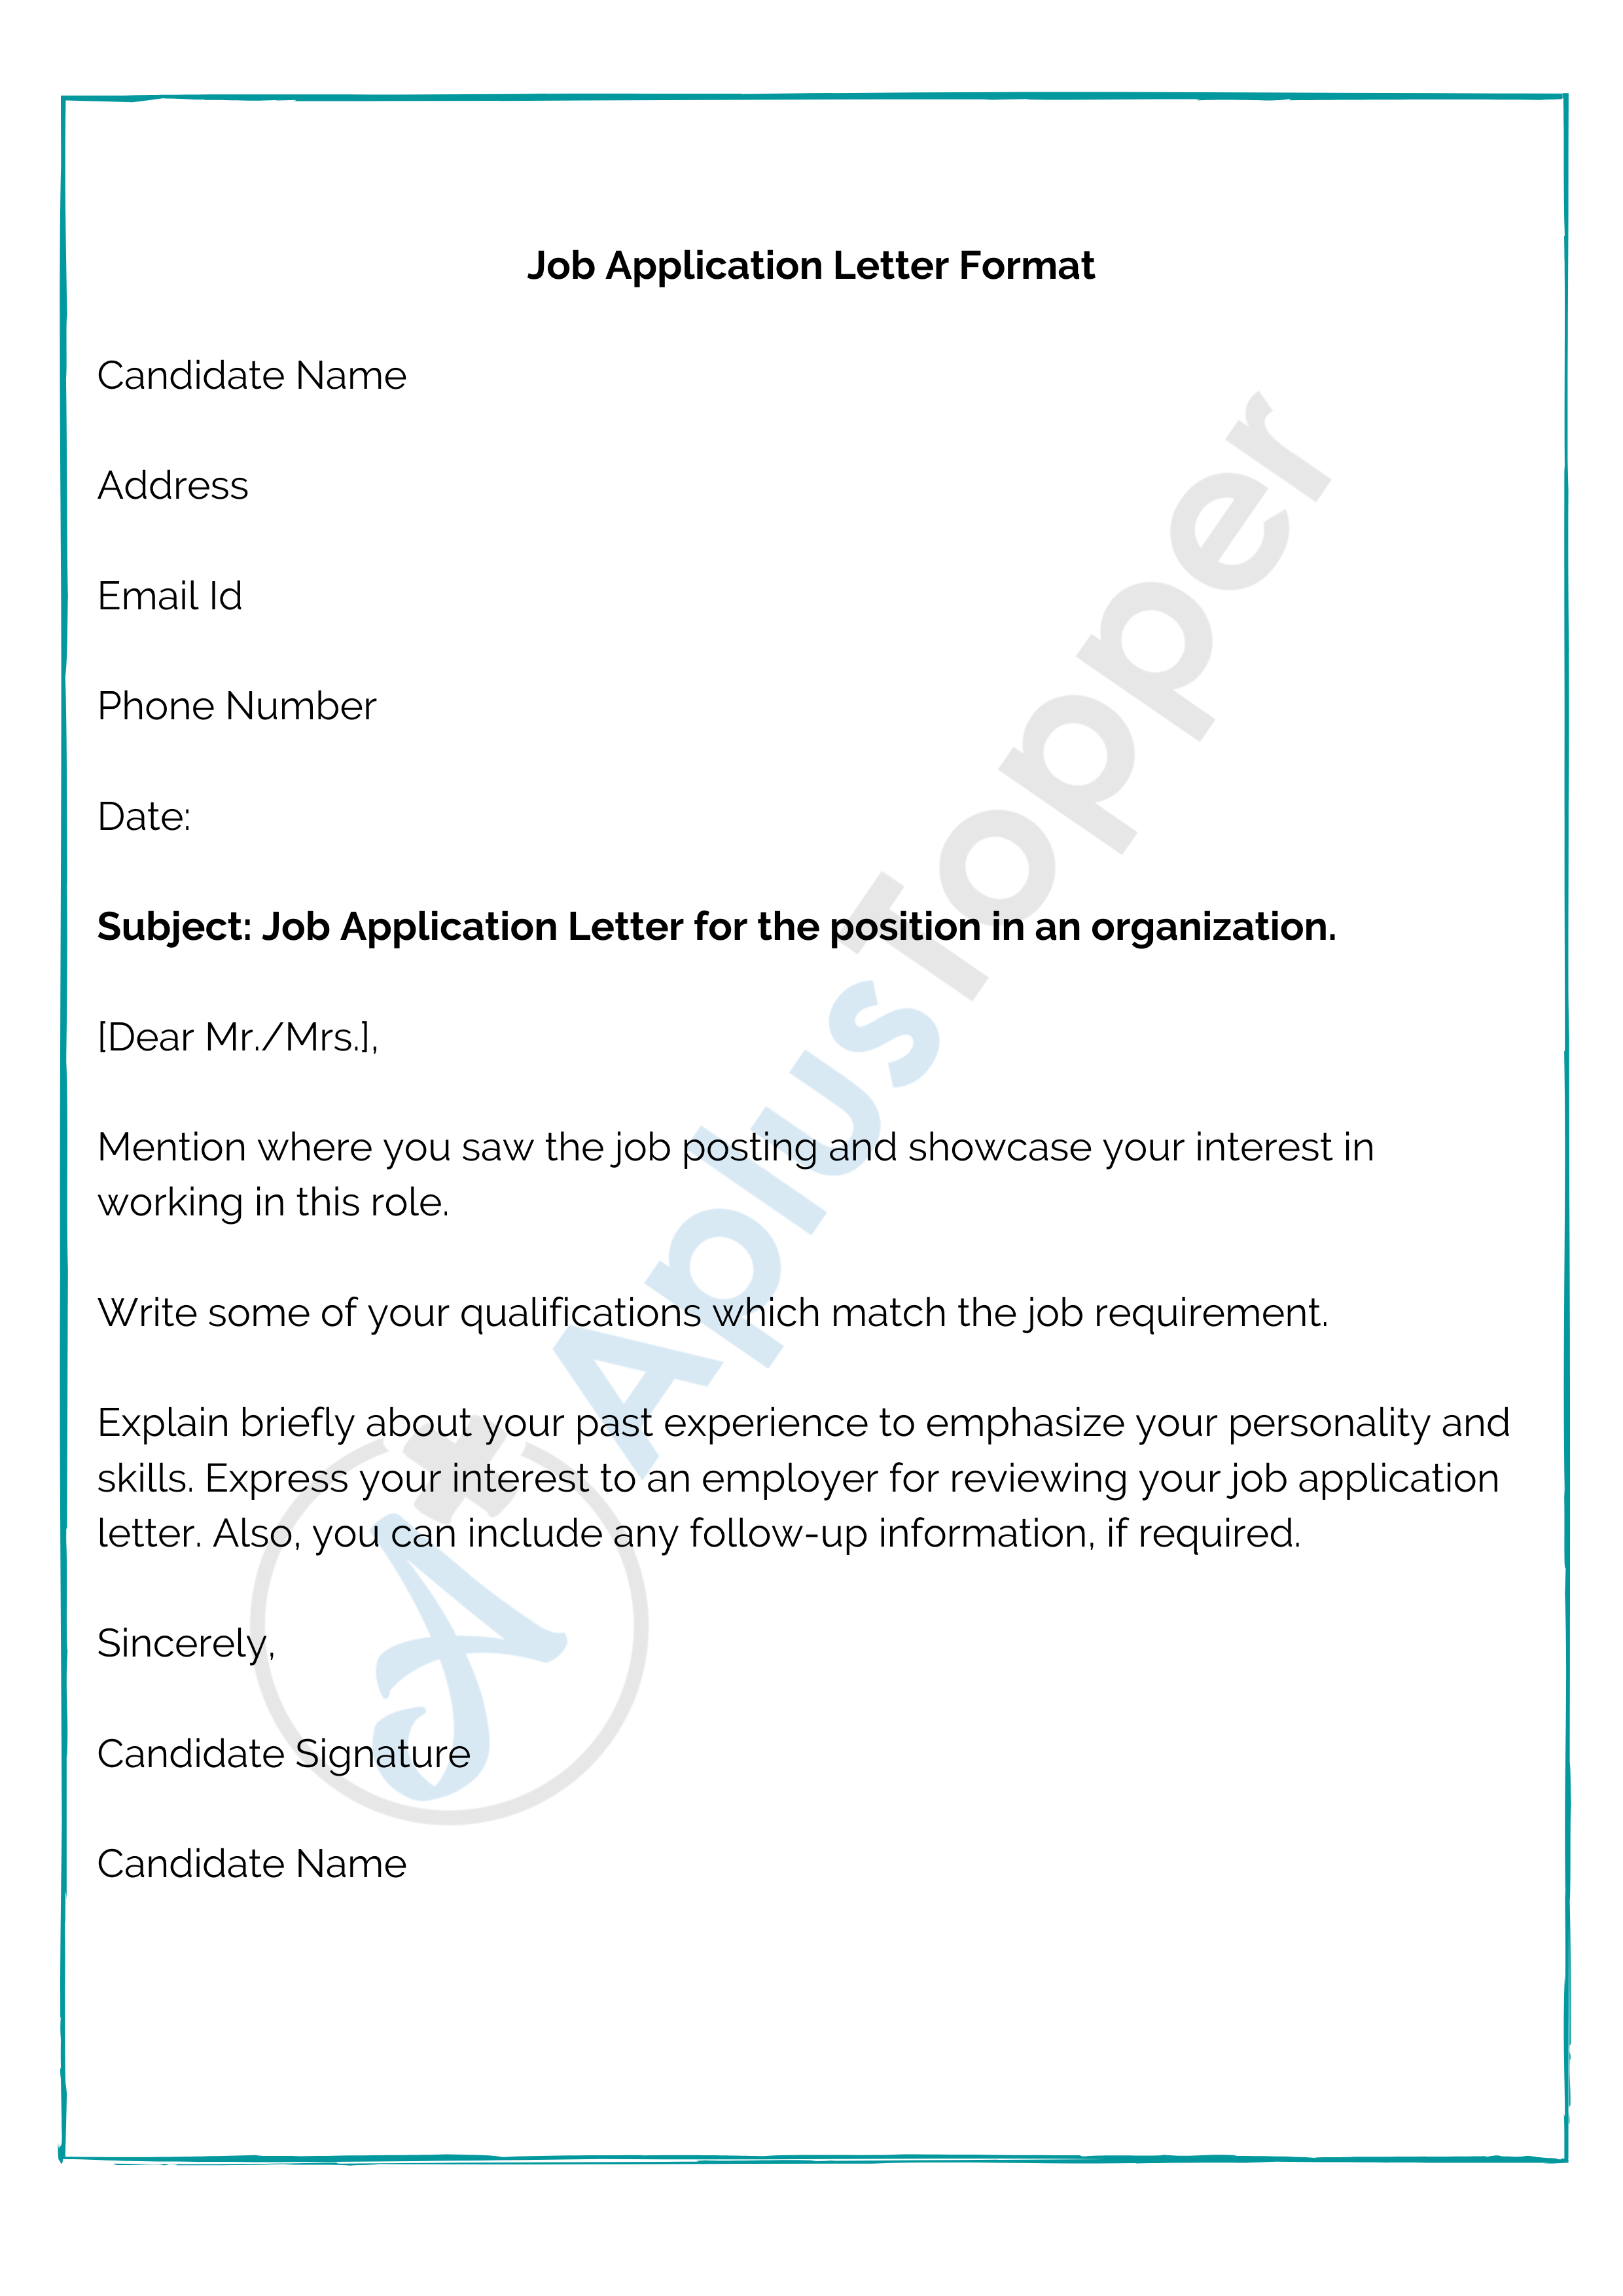 how to write an application letter for job seeking